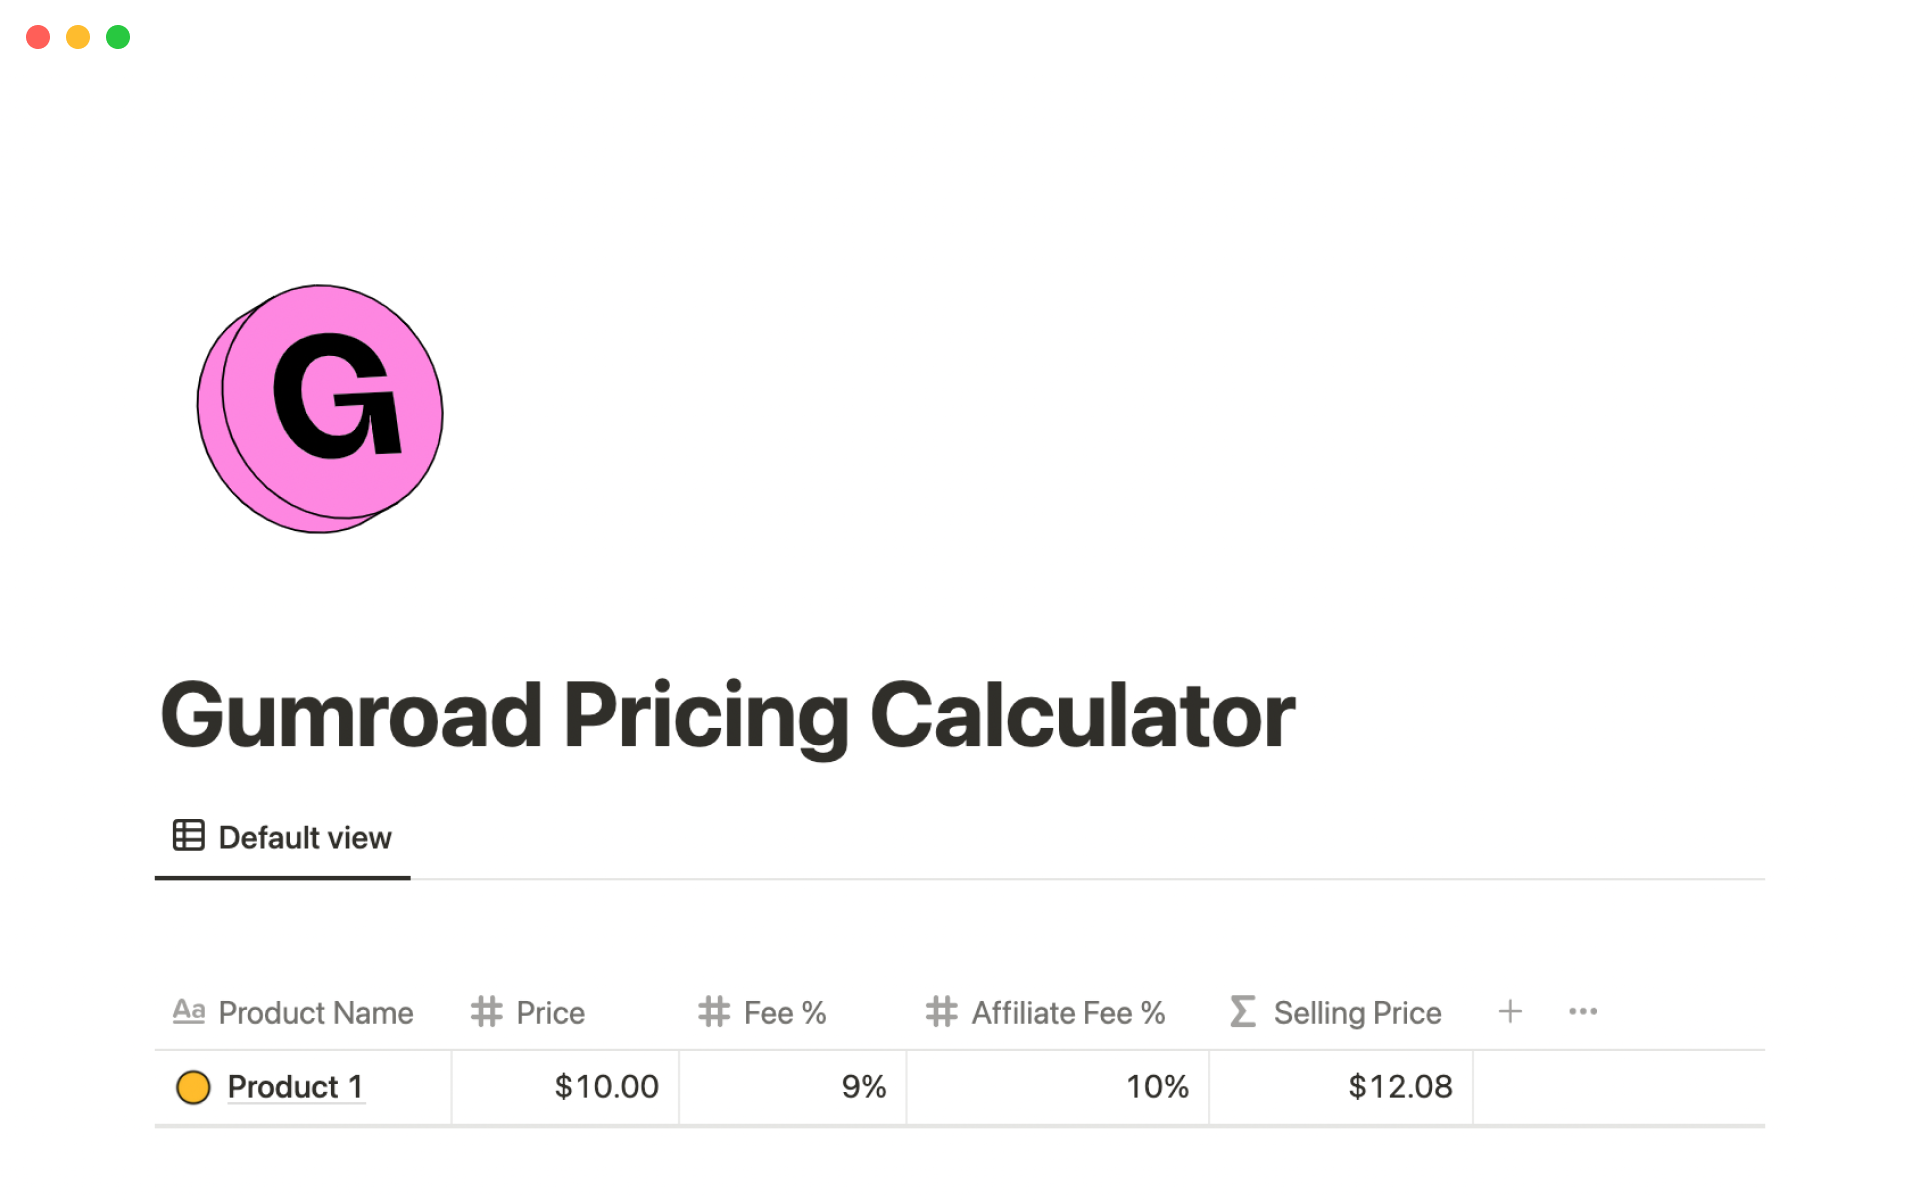 Calculate the final selling price of your Gumroad product.